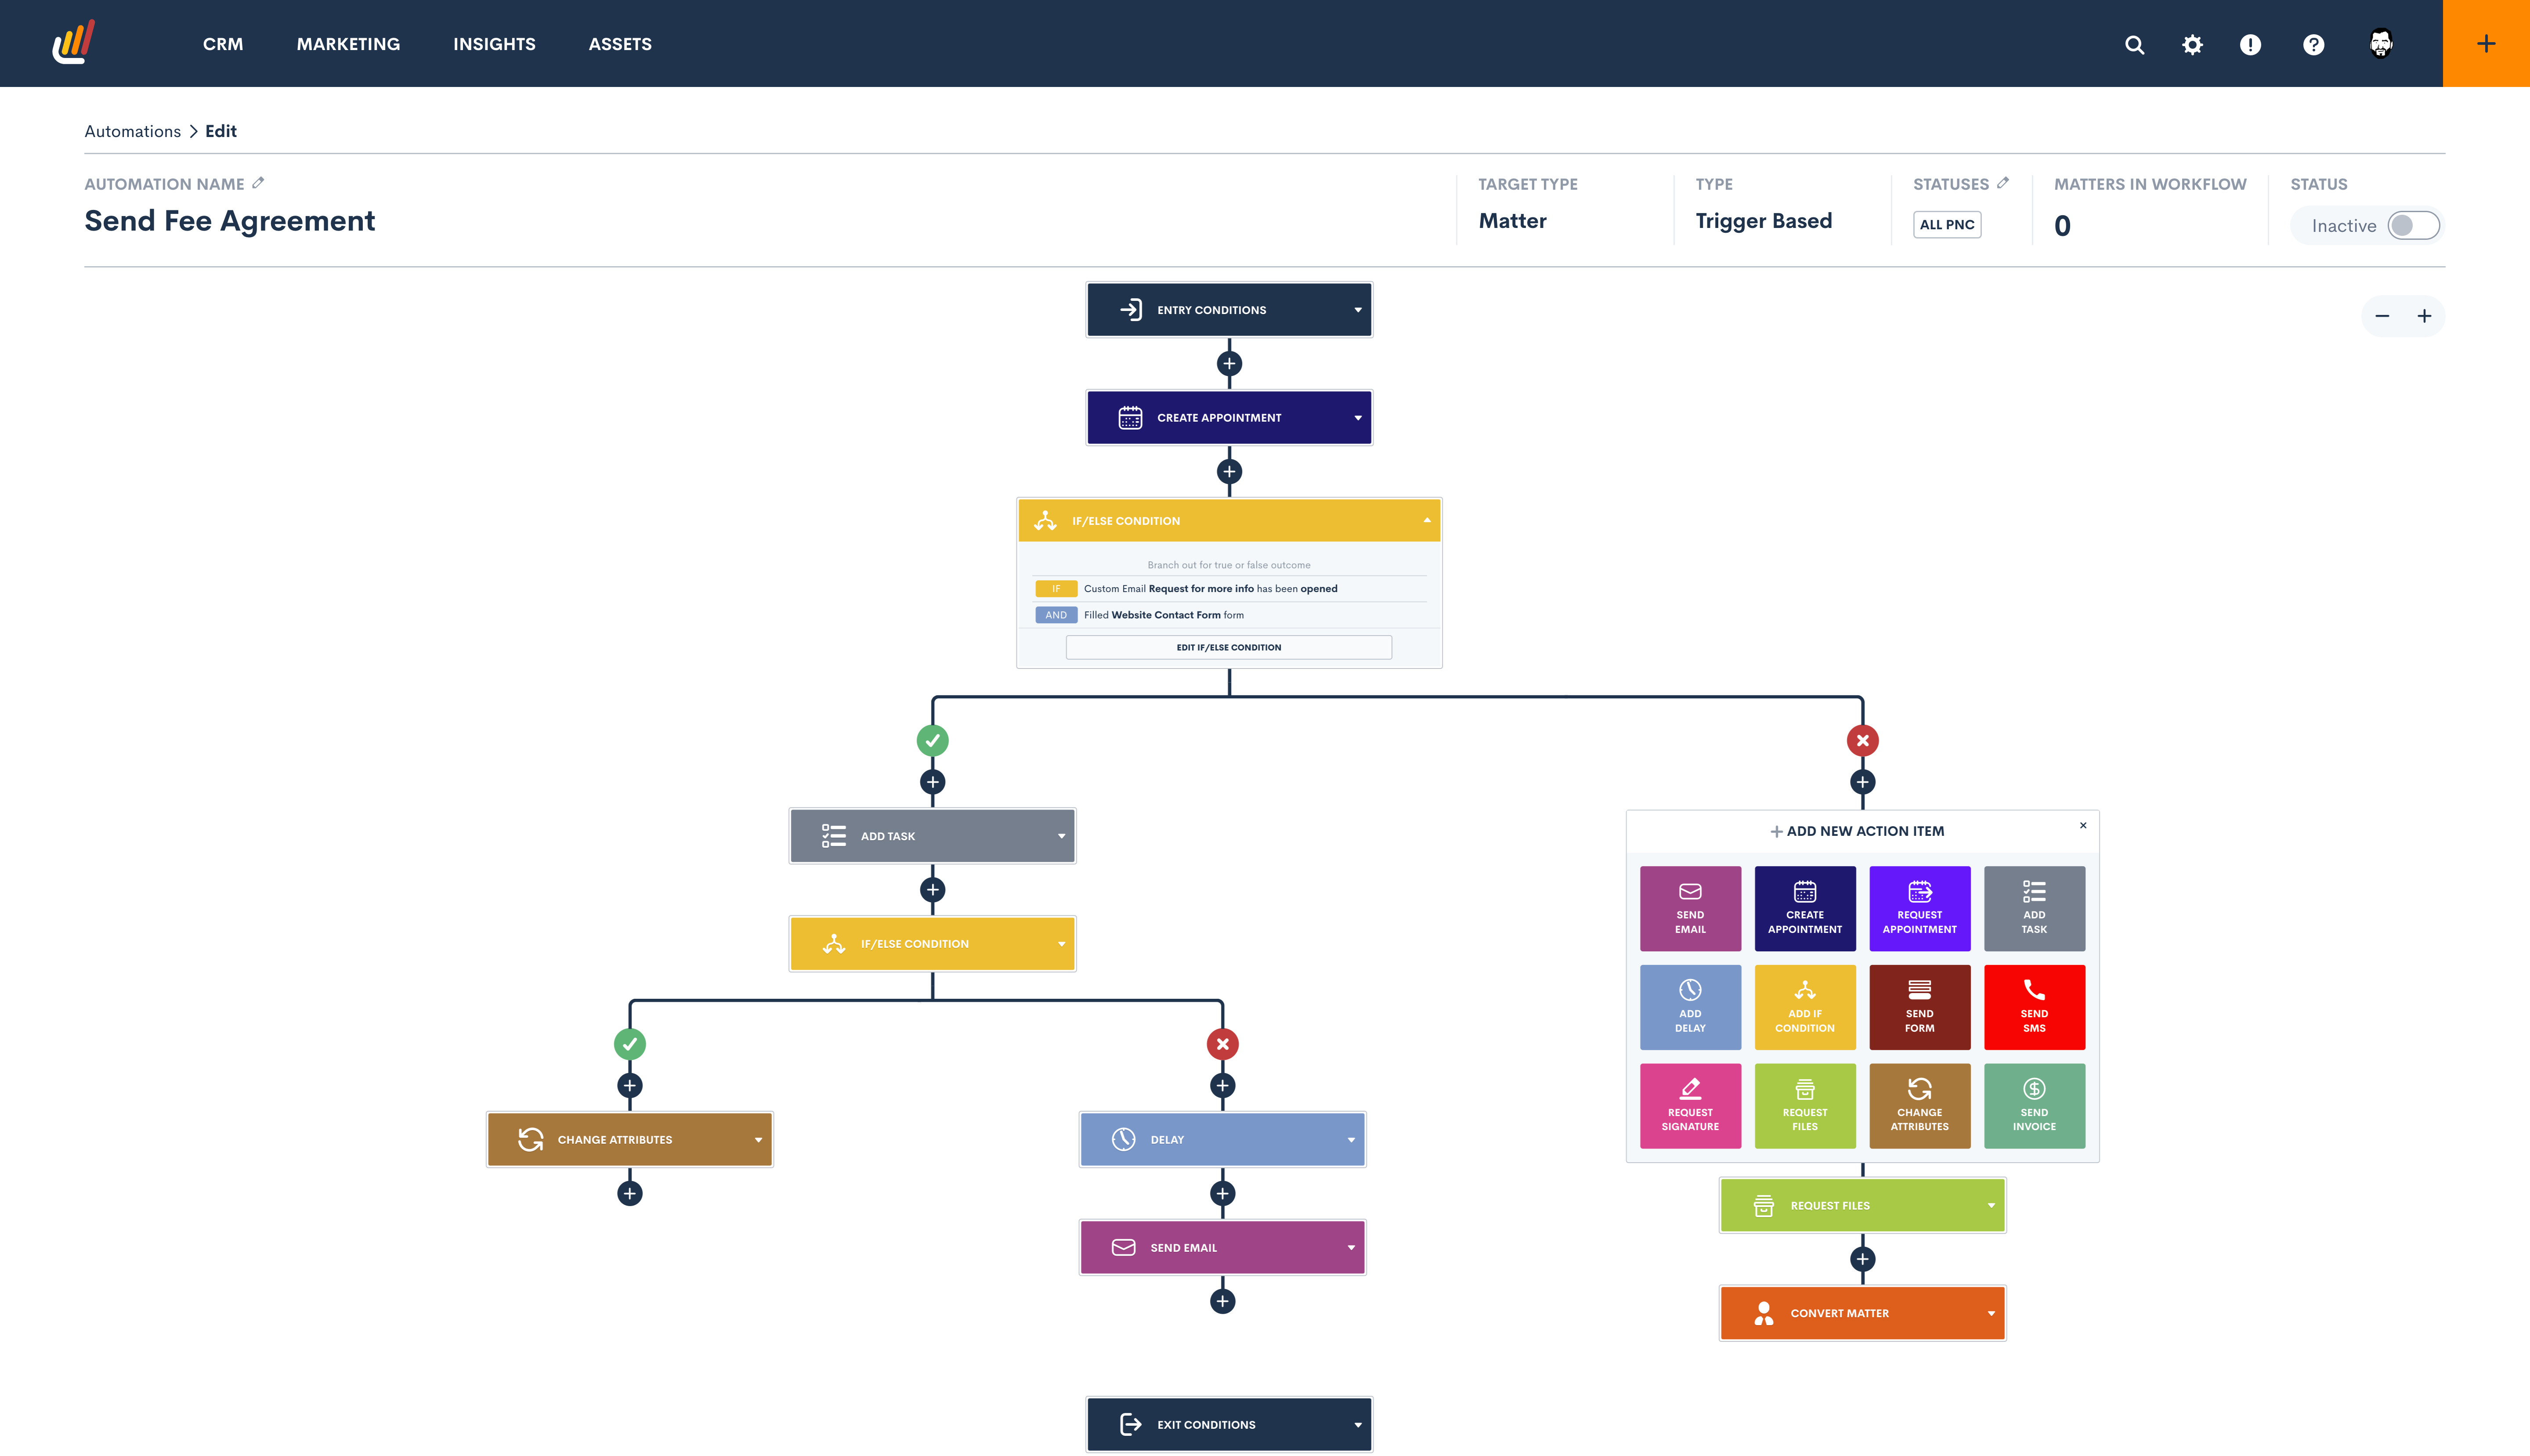 Lawmatics Software - The automation engine is an intuitive, visual interface that allows user to create customized workflows by simply connecting the system actions you want to automate (e.g. email, SMS, appointment request, send document). No code needed!